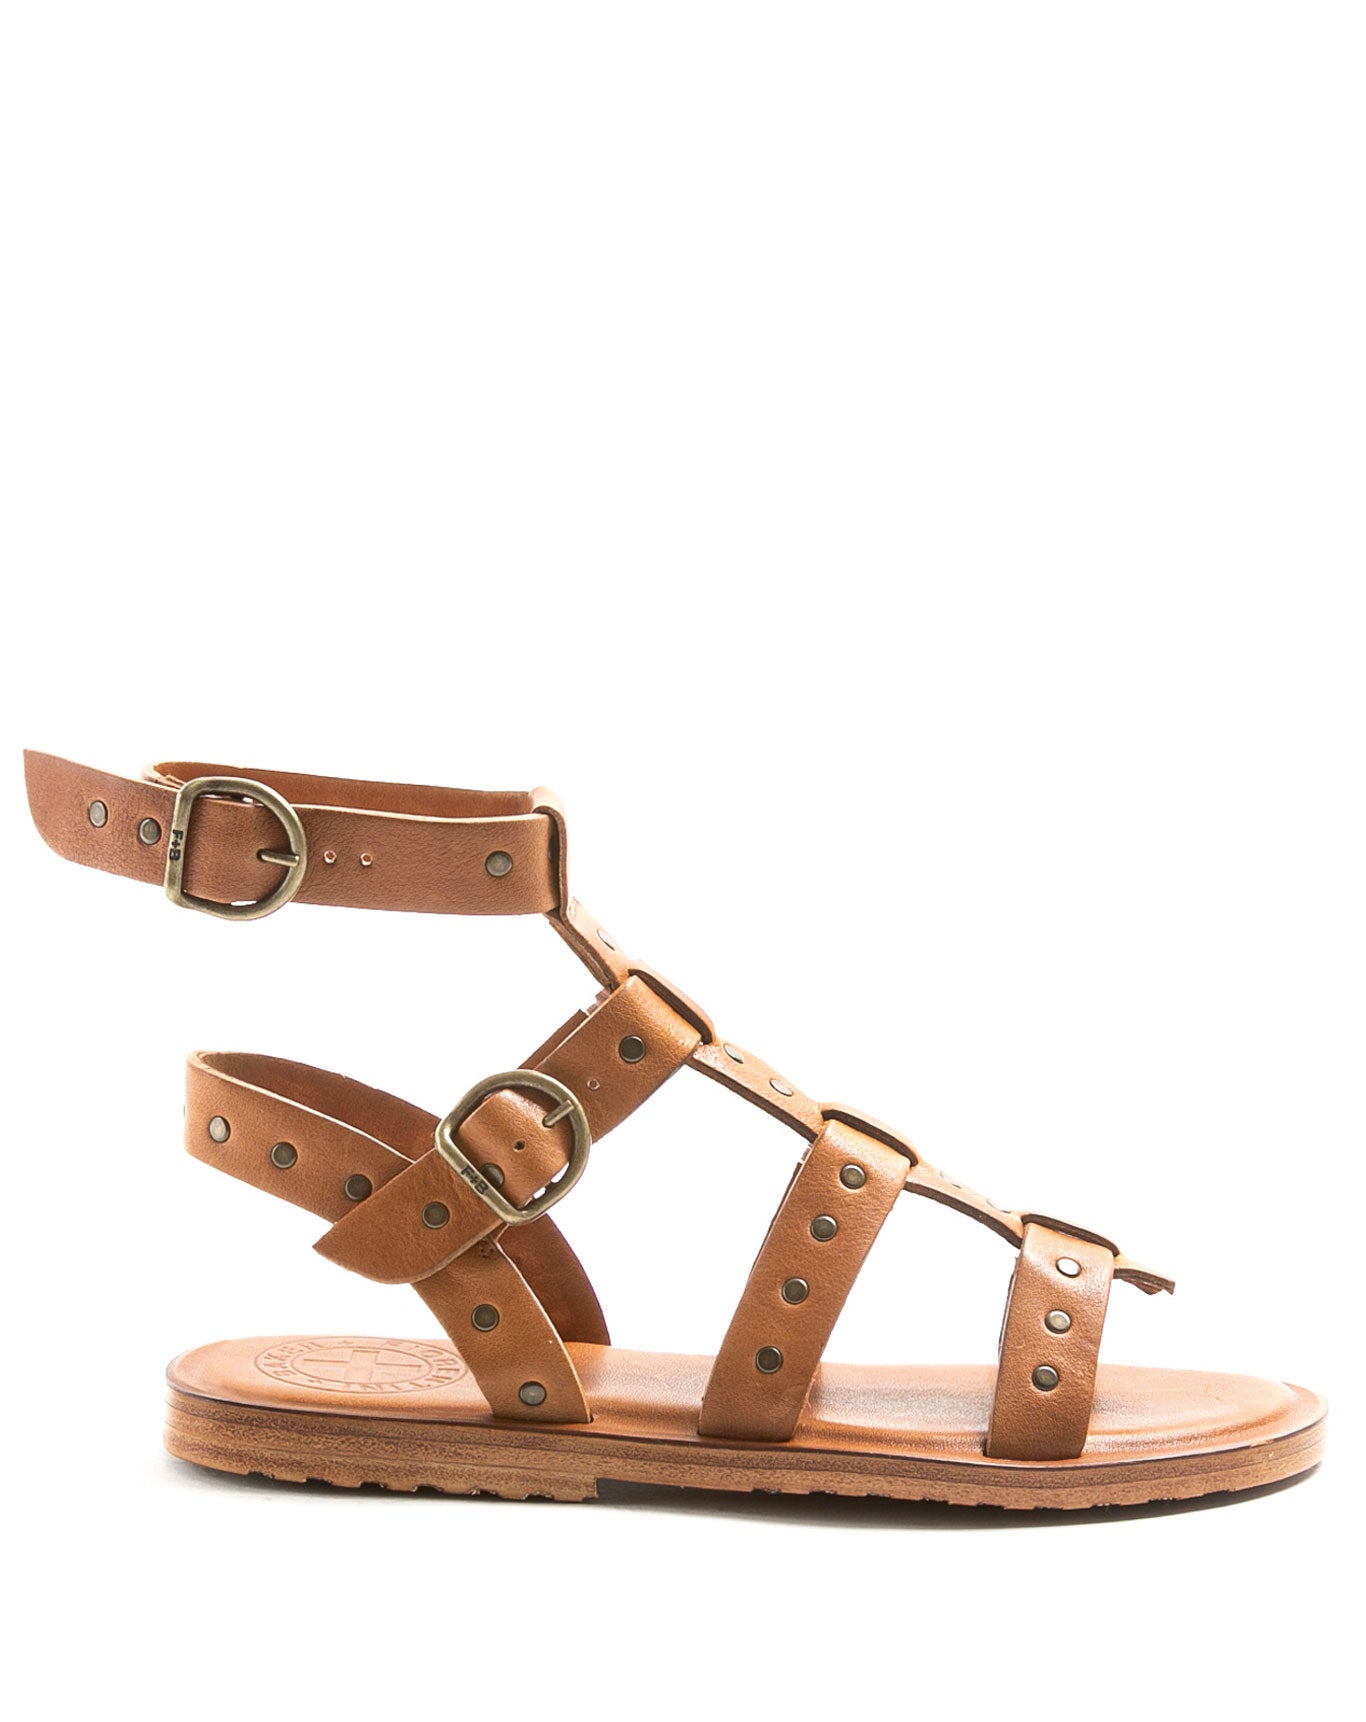 FIORENTINI + BAKER, ZANTE ZEN, Extremely comfortable and supple lined leather sandal with buckled straps and studs. Handcrafted by skilled artisans. Made in Italy. Made to last.